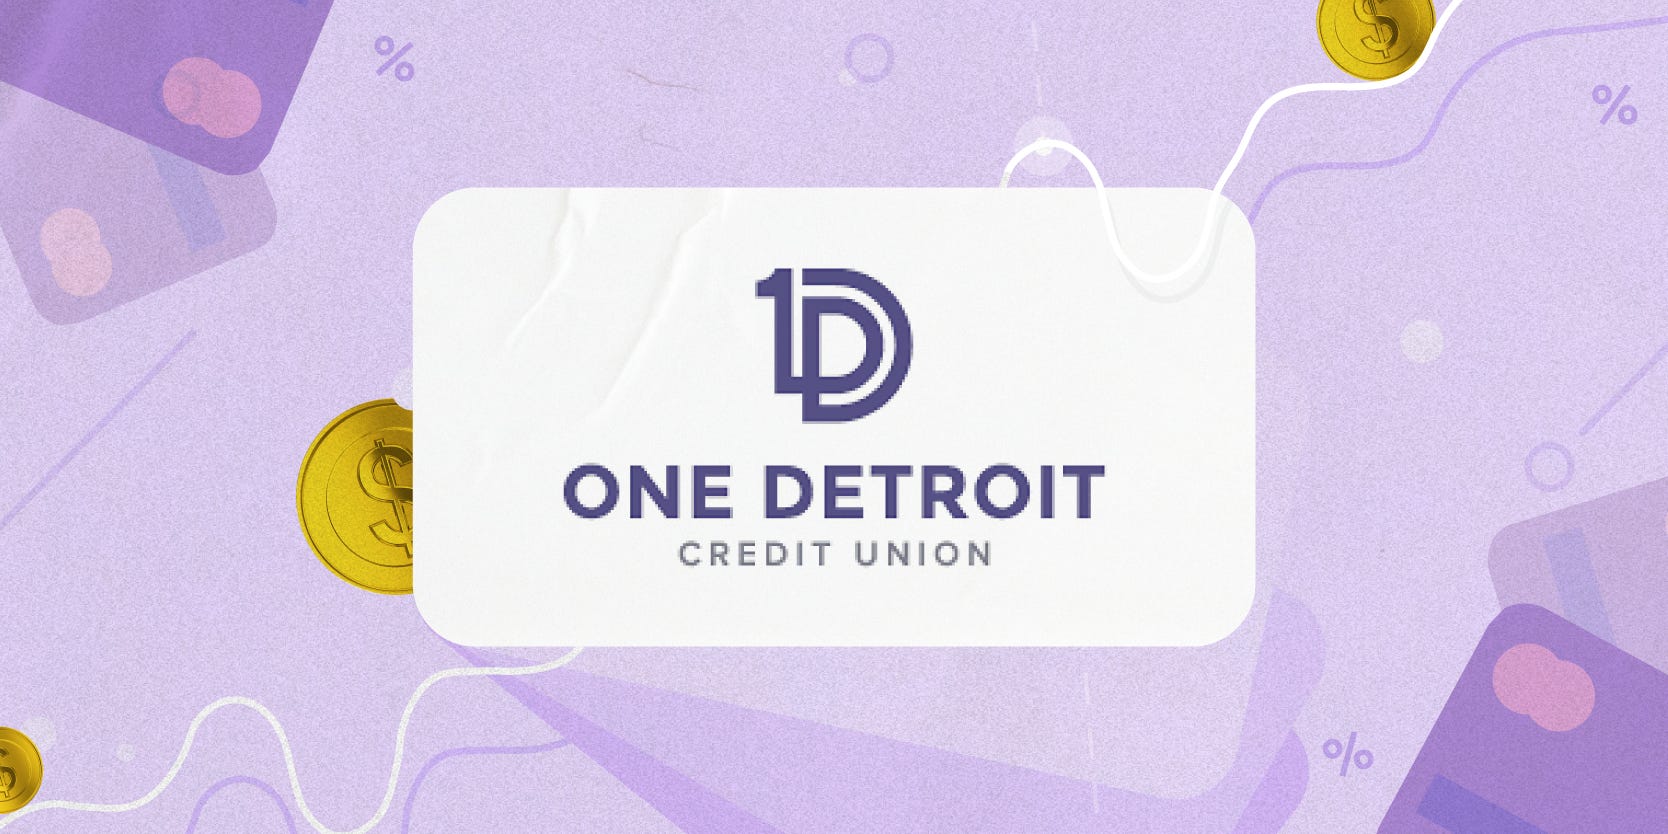 One Detroit Credit Union logo surrounded by illustrations of coins and credit cards.